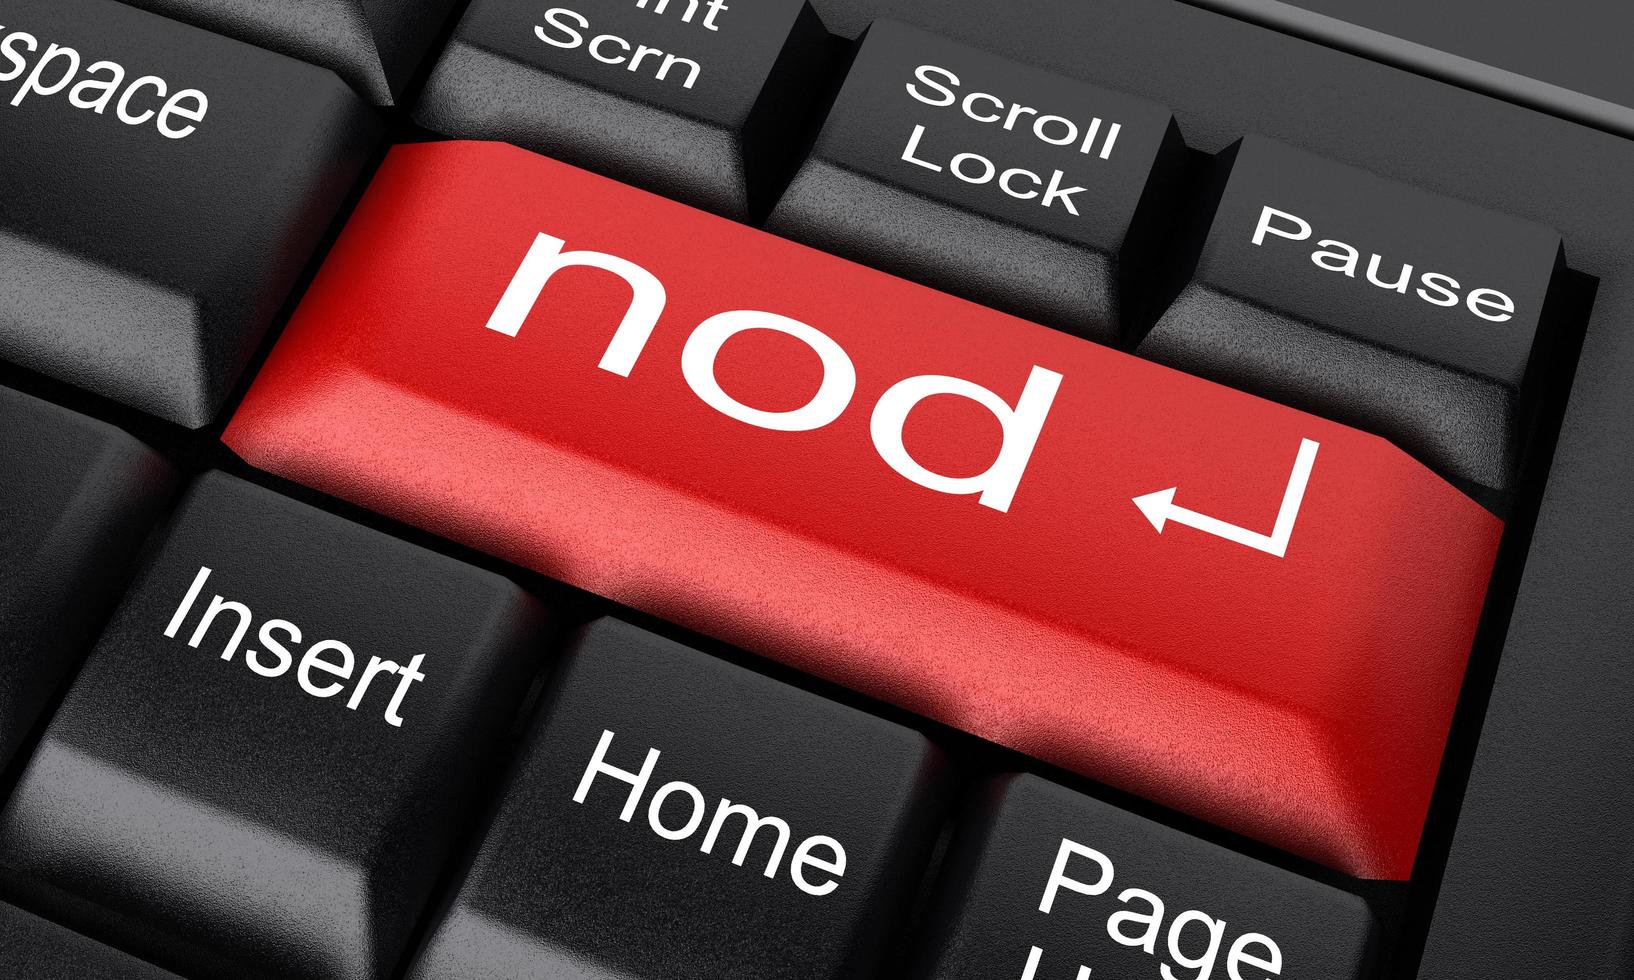 nod word on red keyboard button photo